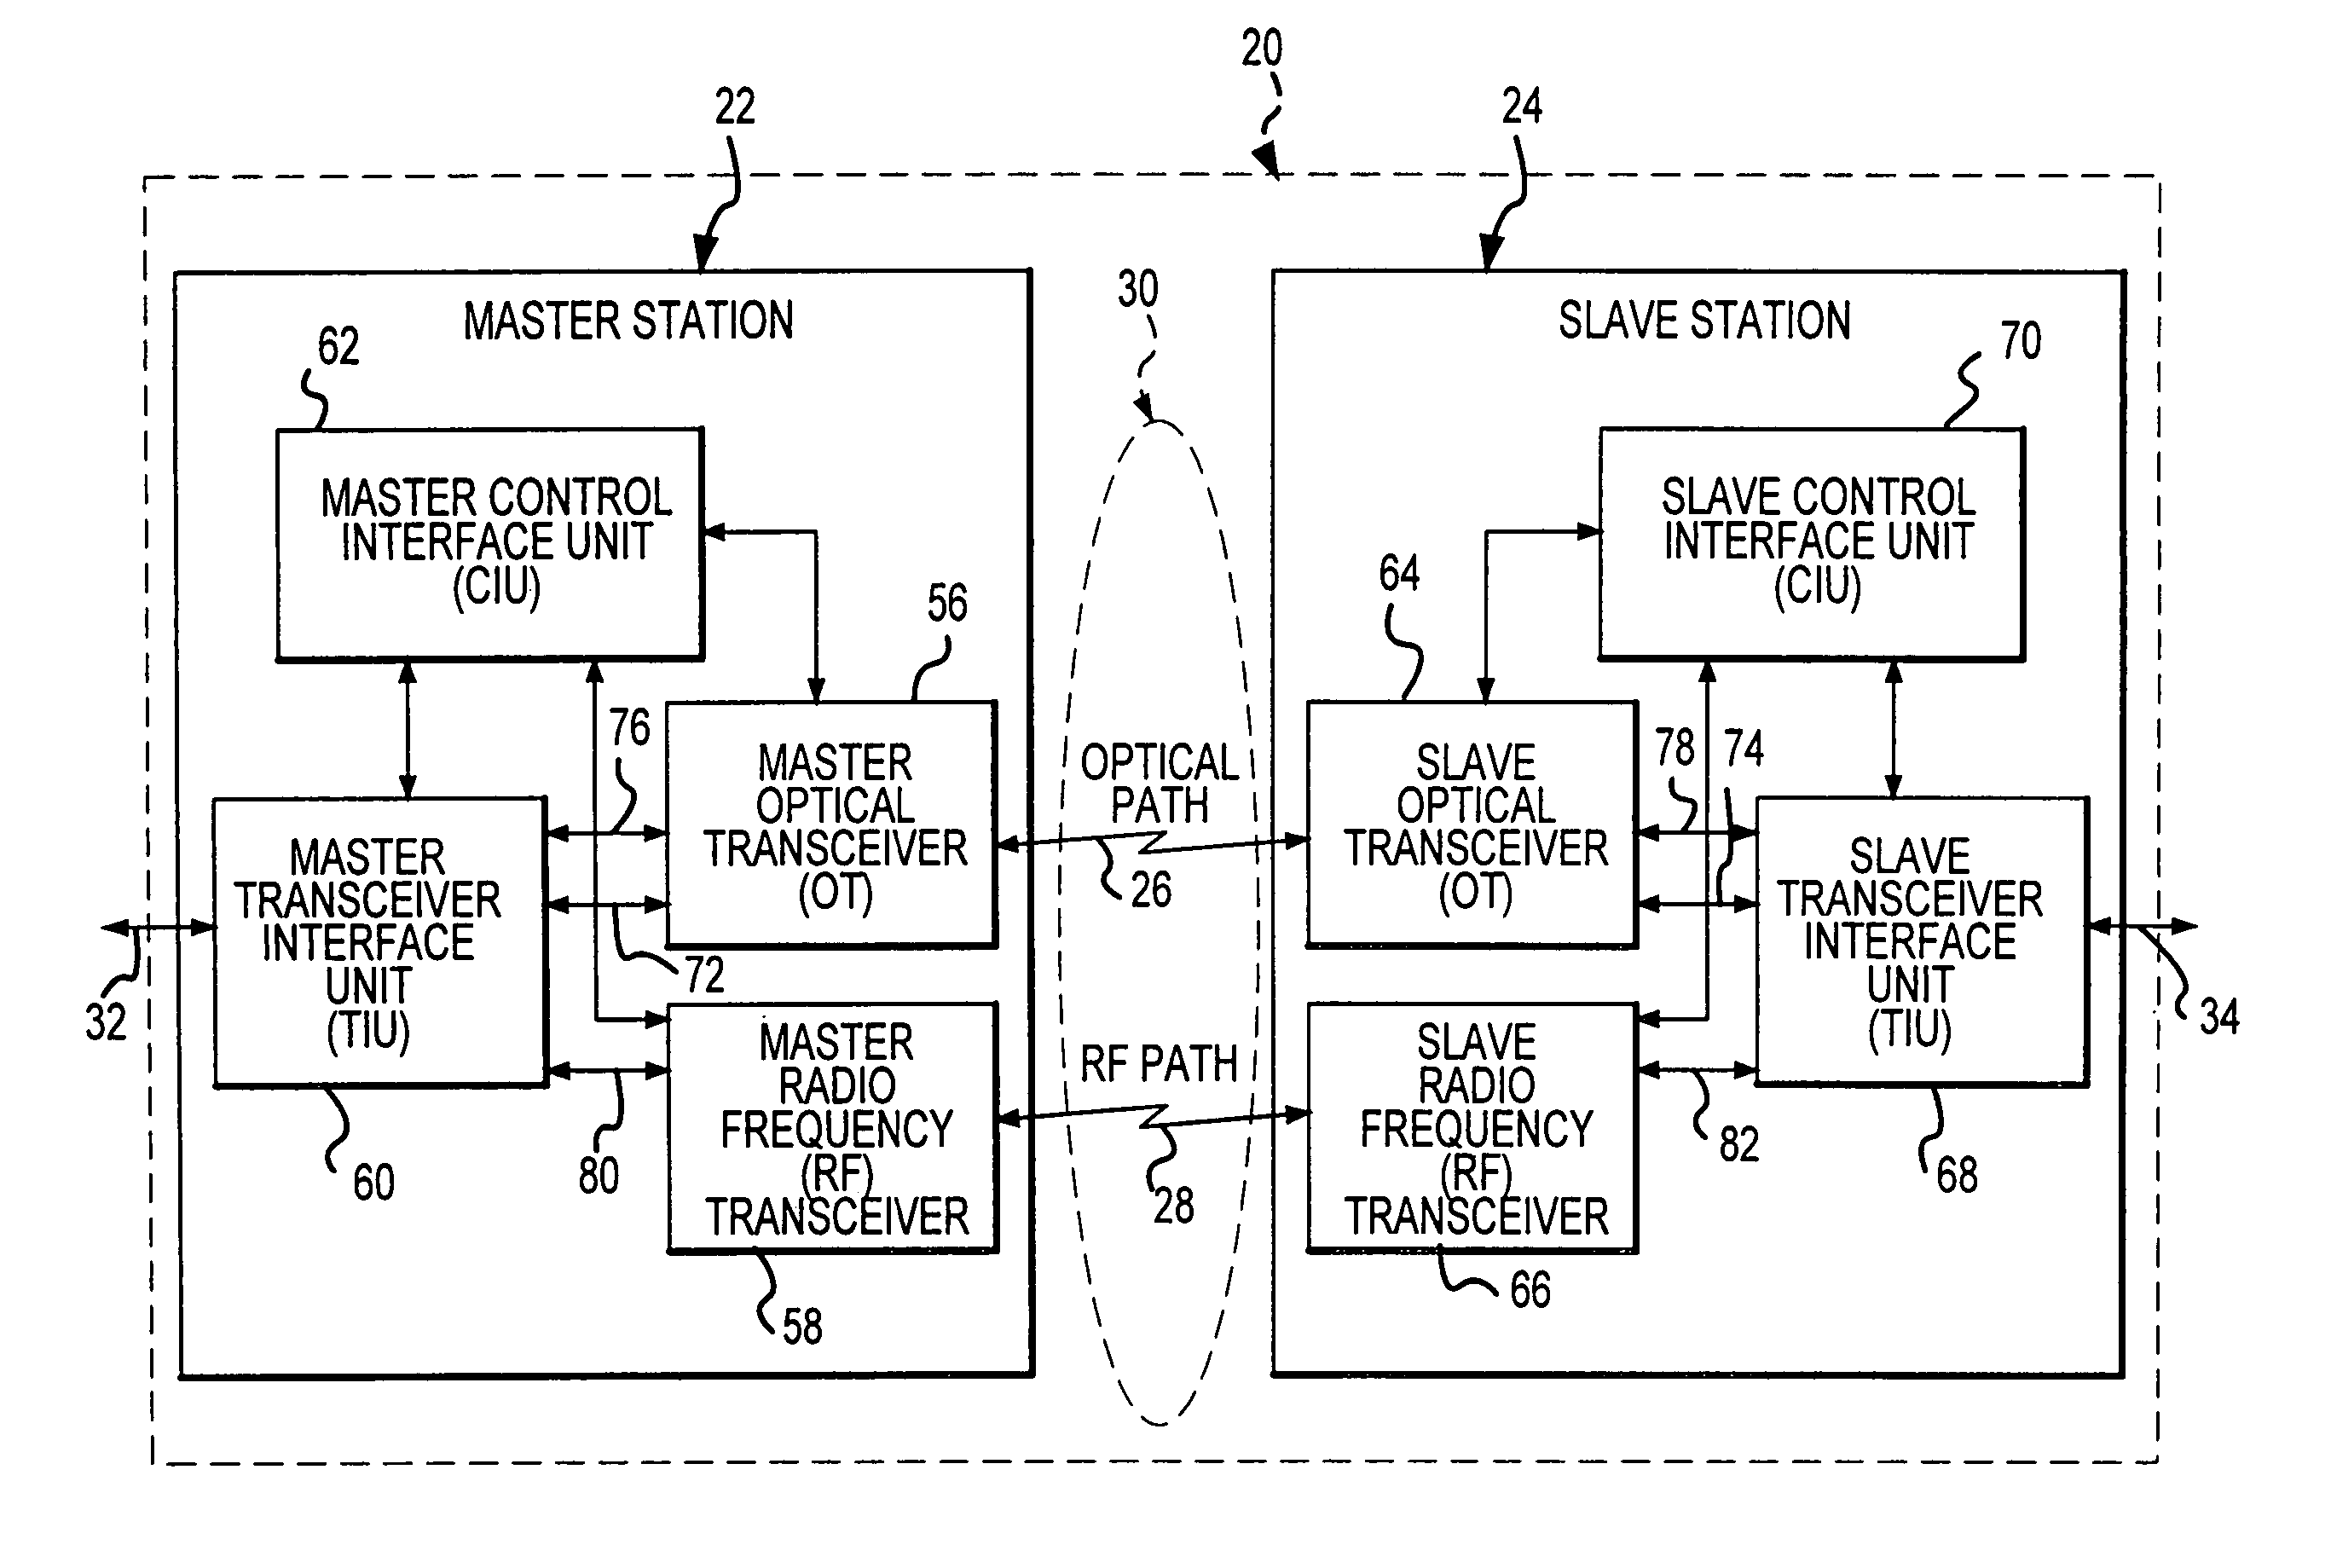 Hybrid wireless optical and radio frequency communication link